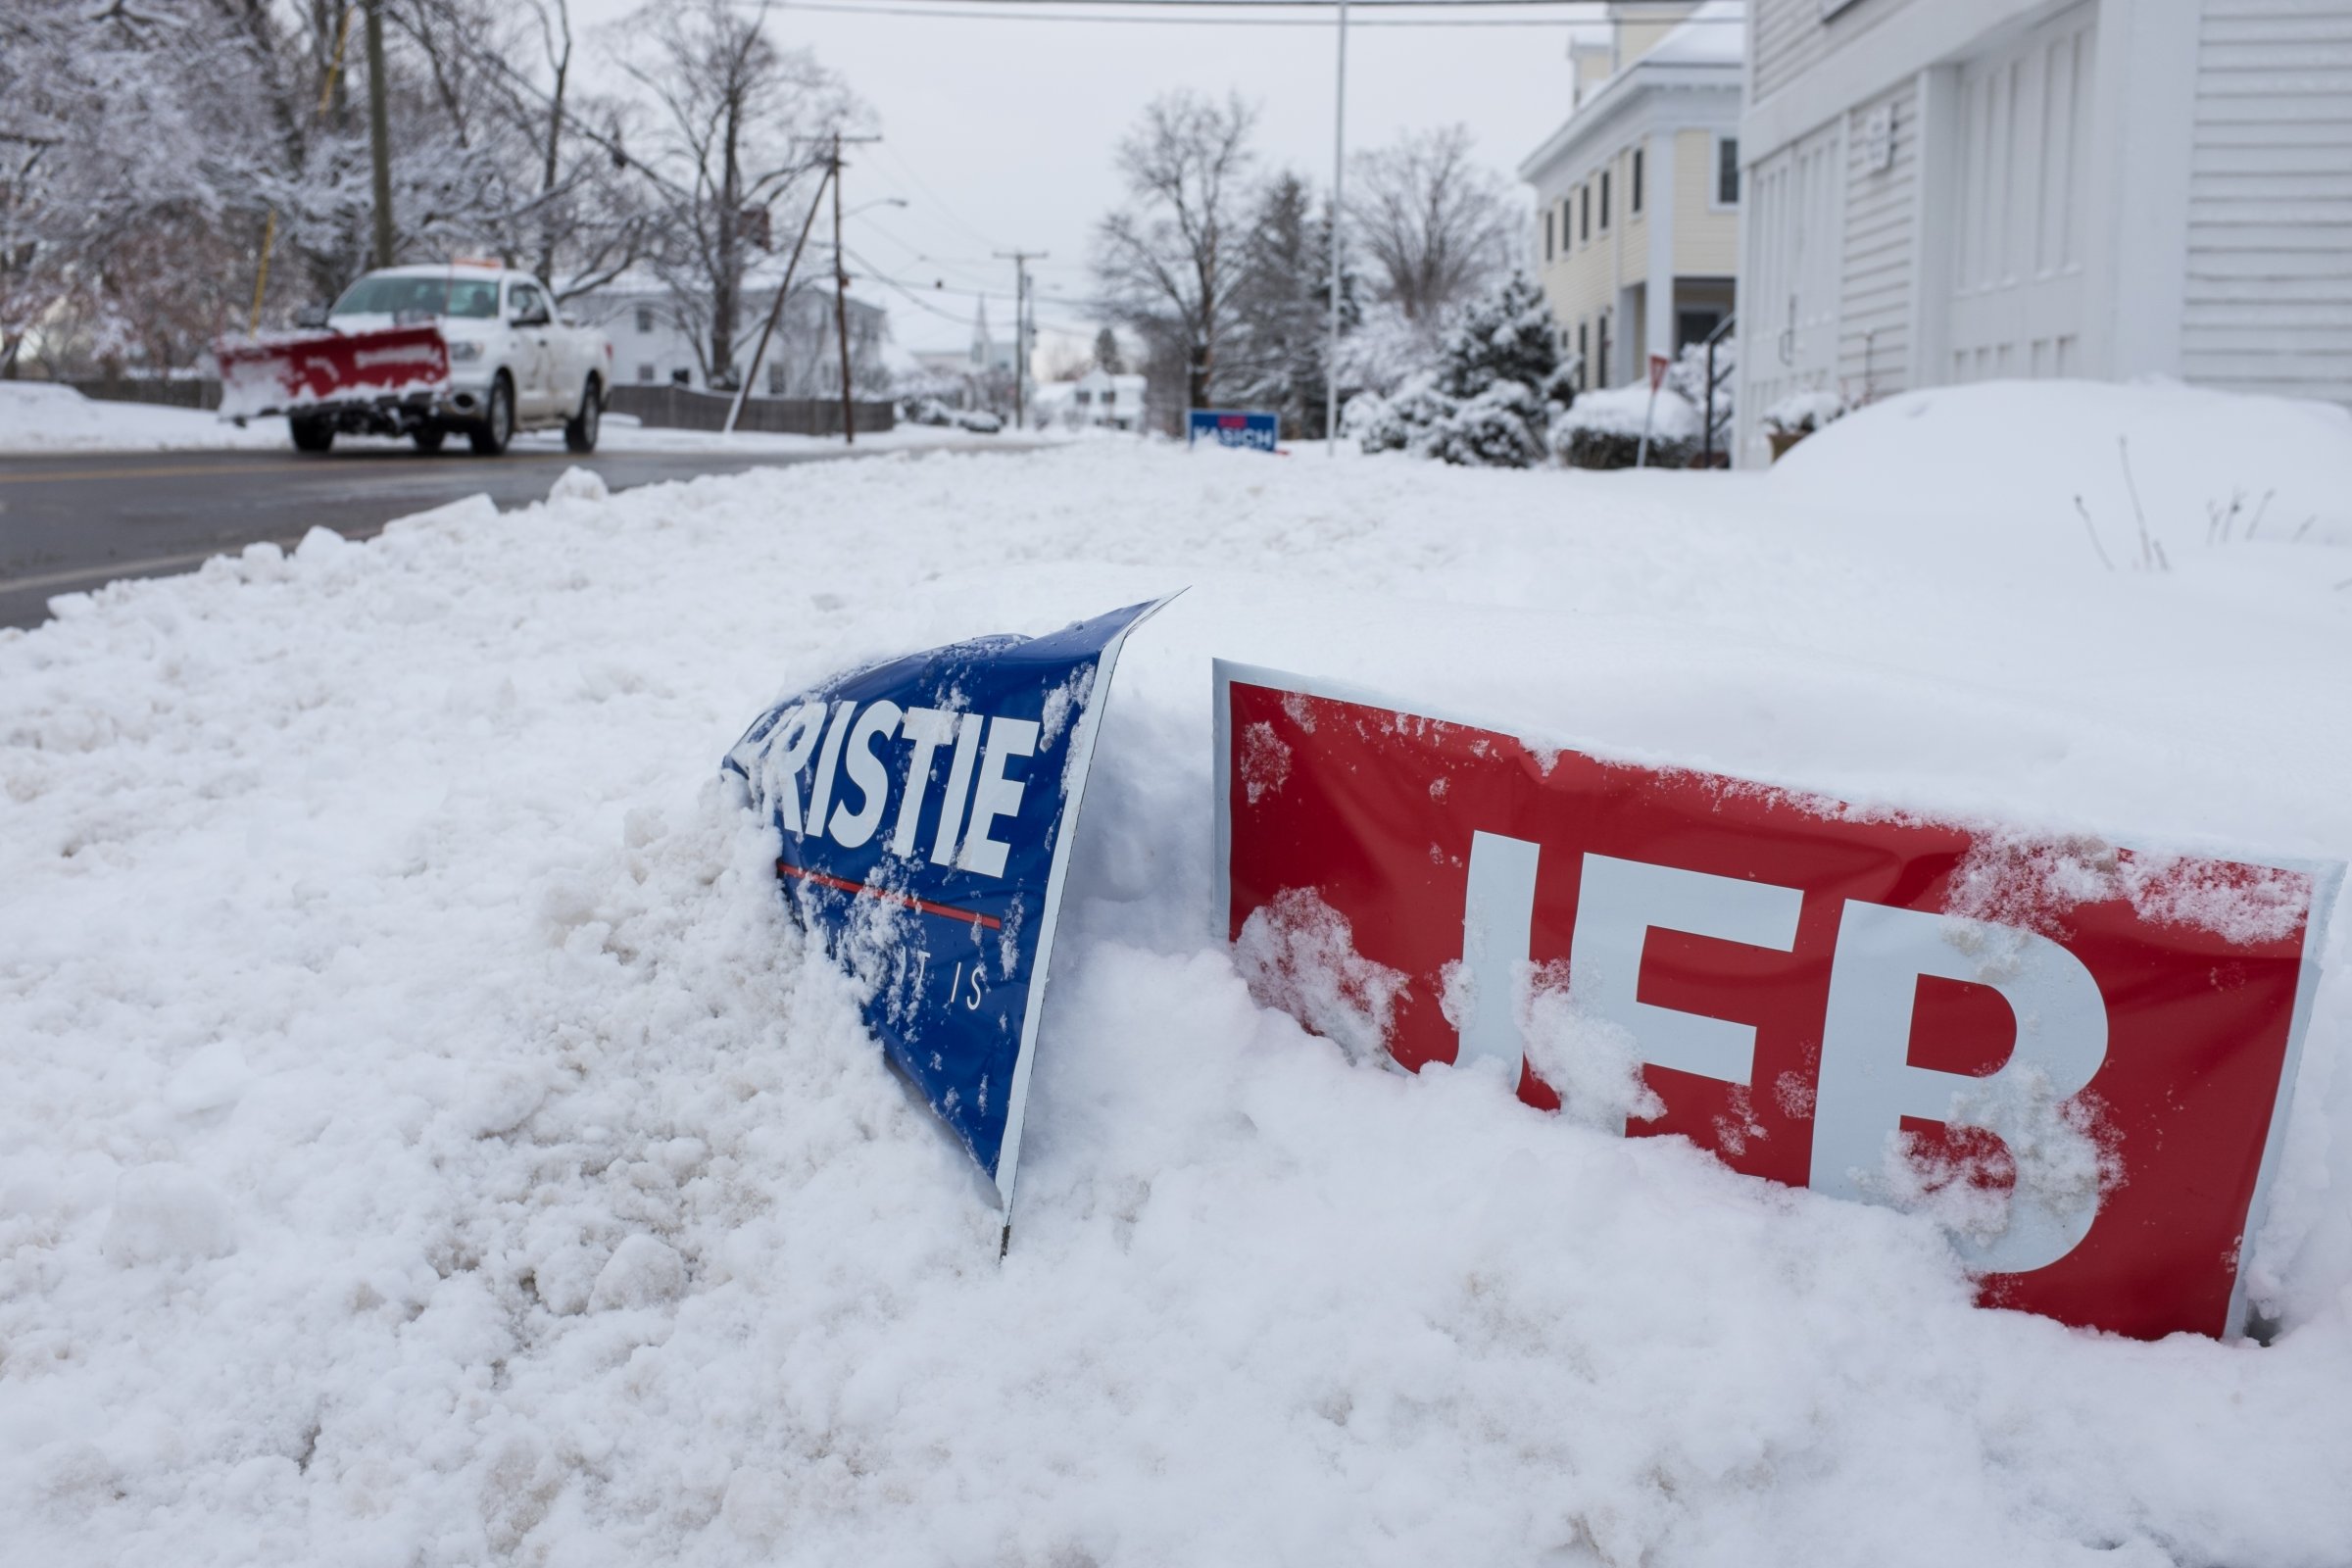 Political signs buried in snow are seen on Feb. 5, 2016 in Hollis, New Hampshire.